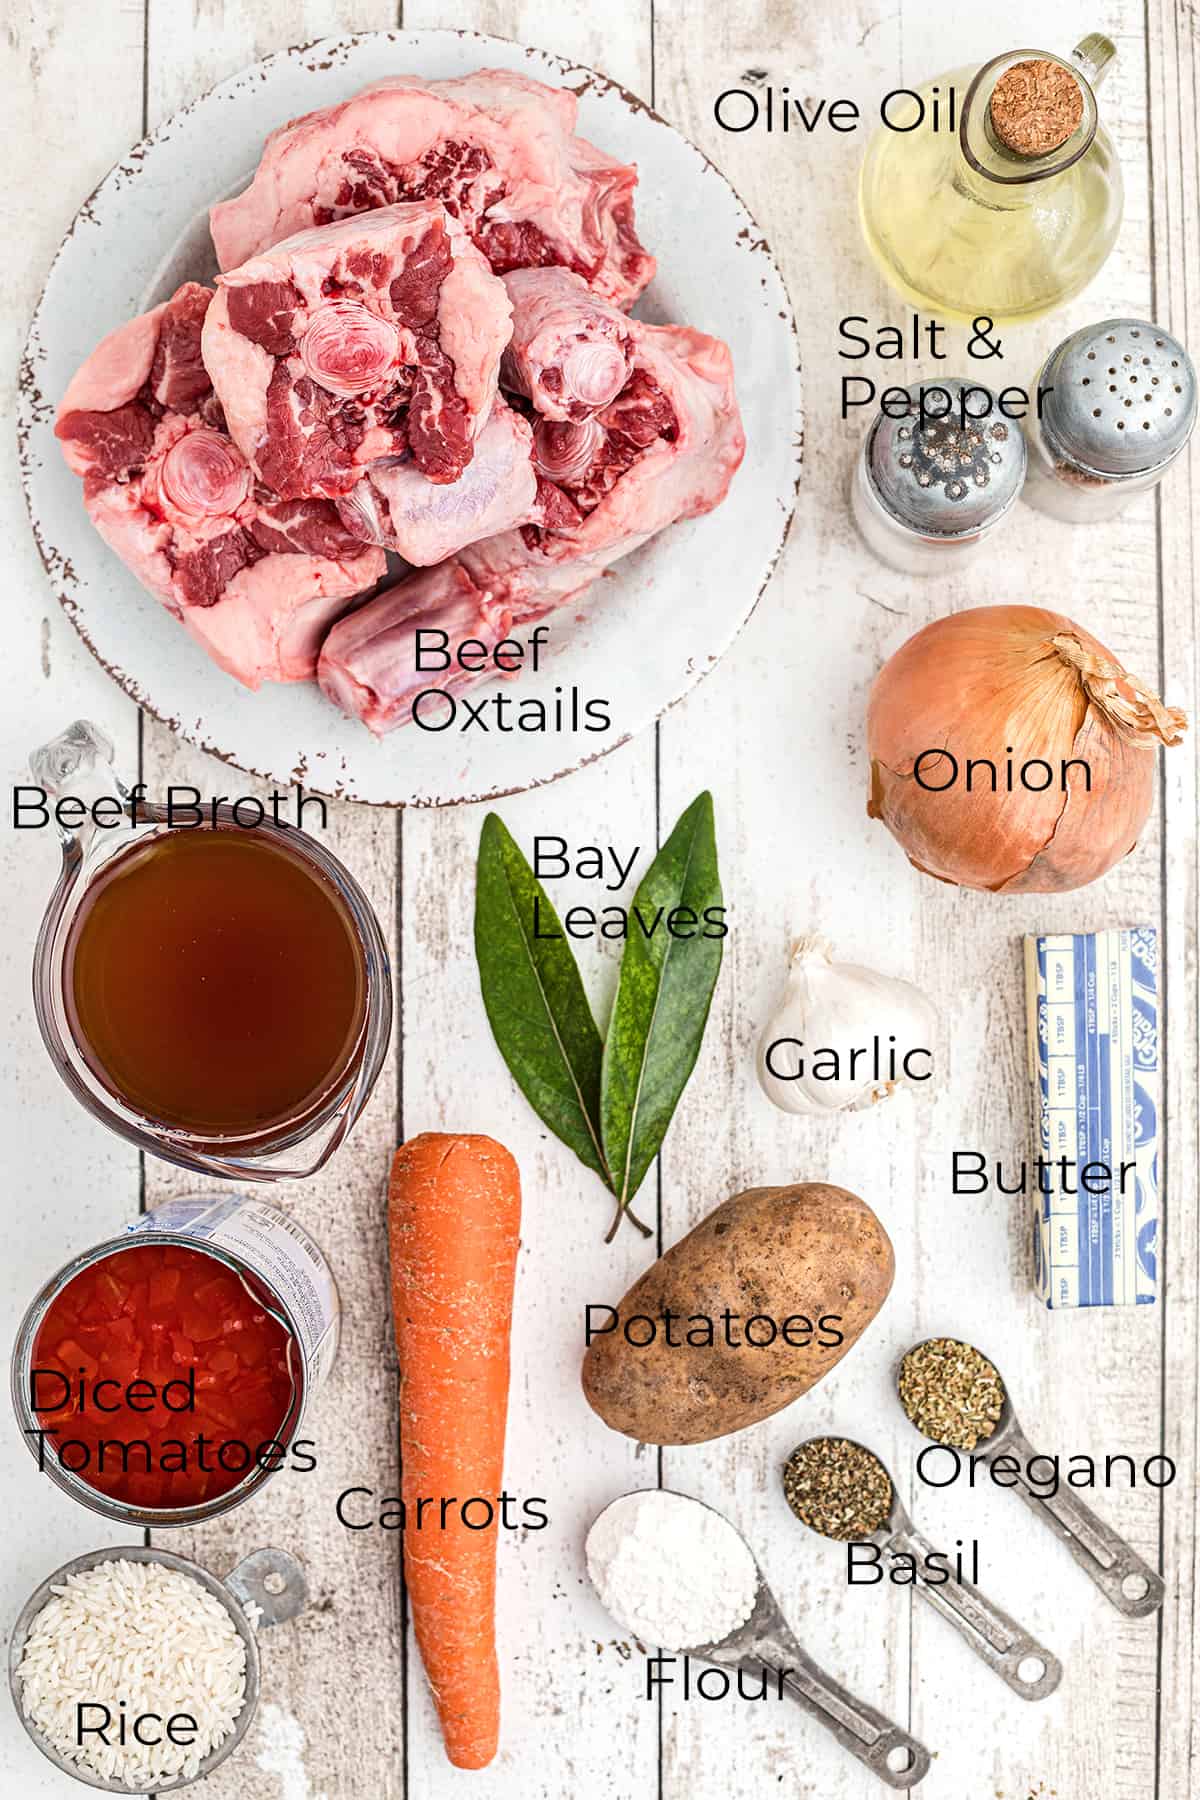 All the ingredients needed to make oxtail stew.